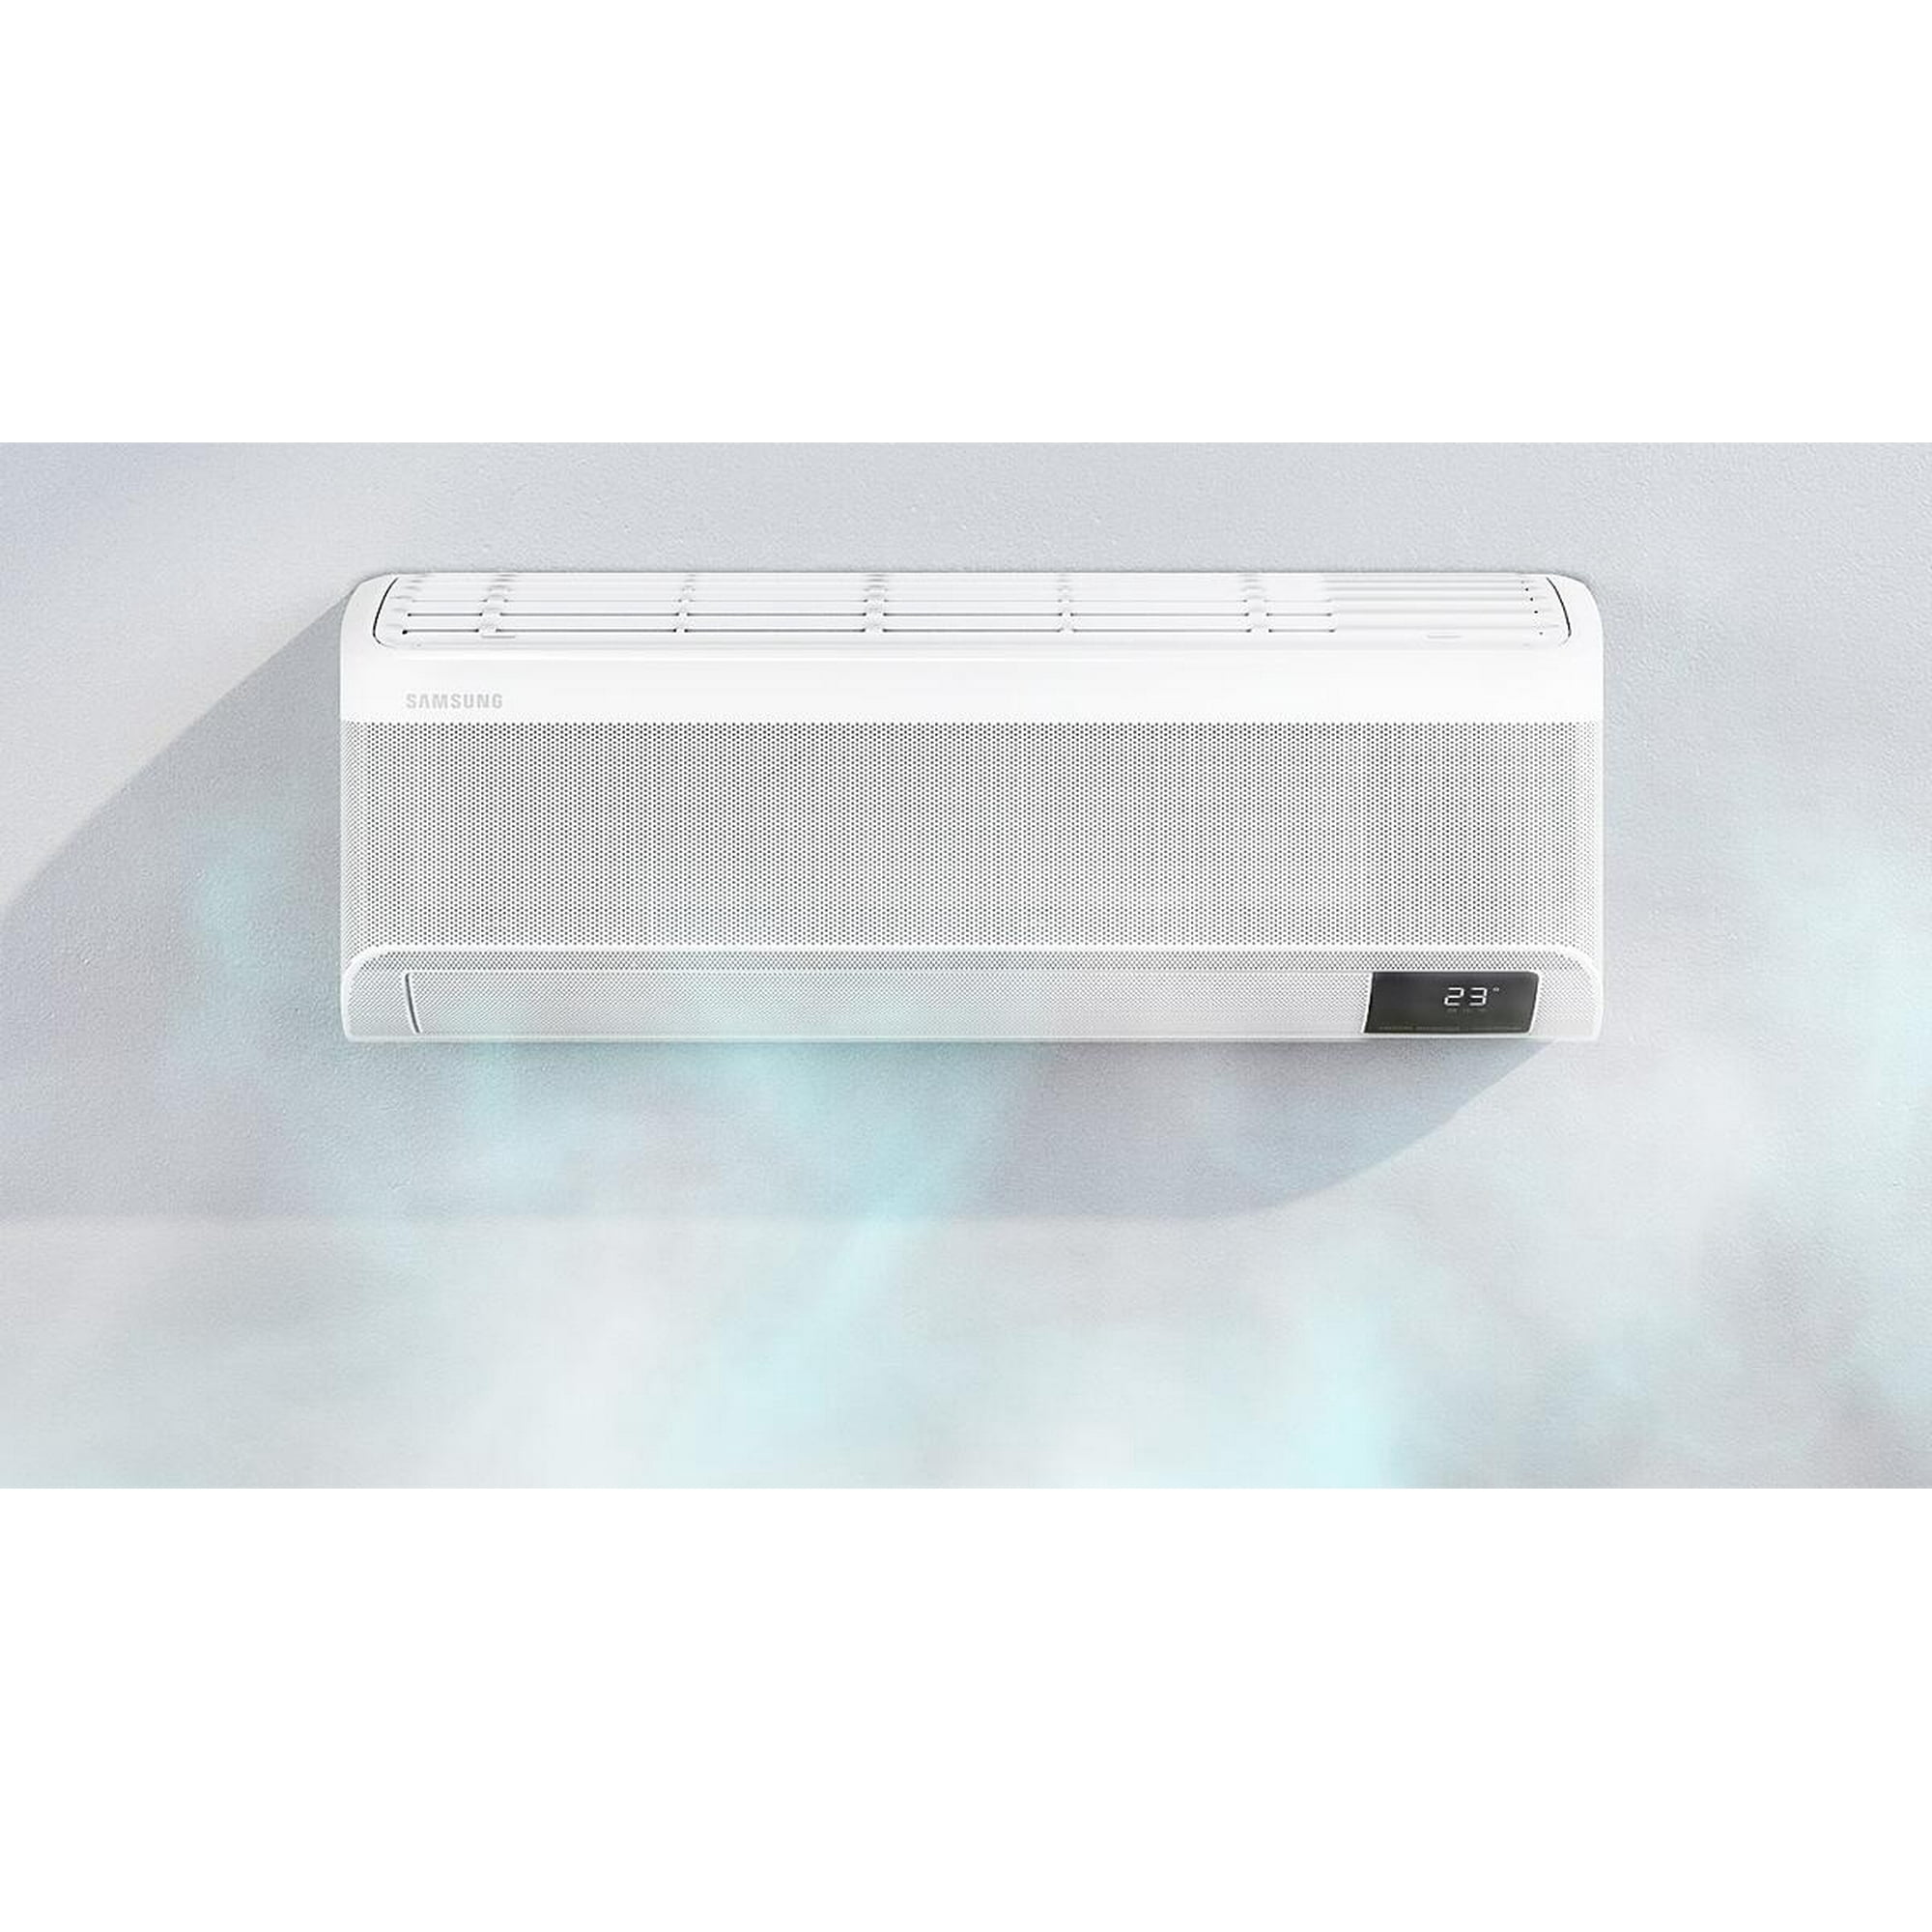 Aire Acond 12000 Btus Inverter Fcalor Wifi Wind Free Excellence Samsung Samsung Ar12tseacwkax 8210